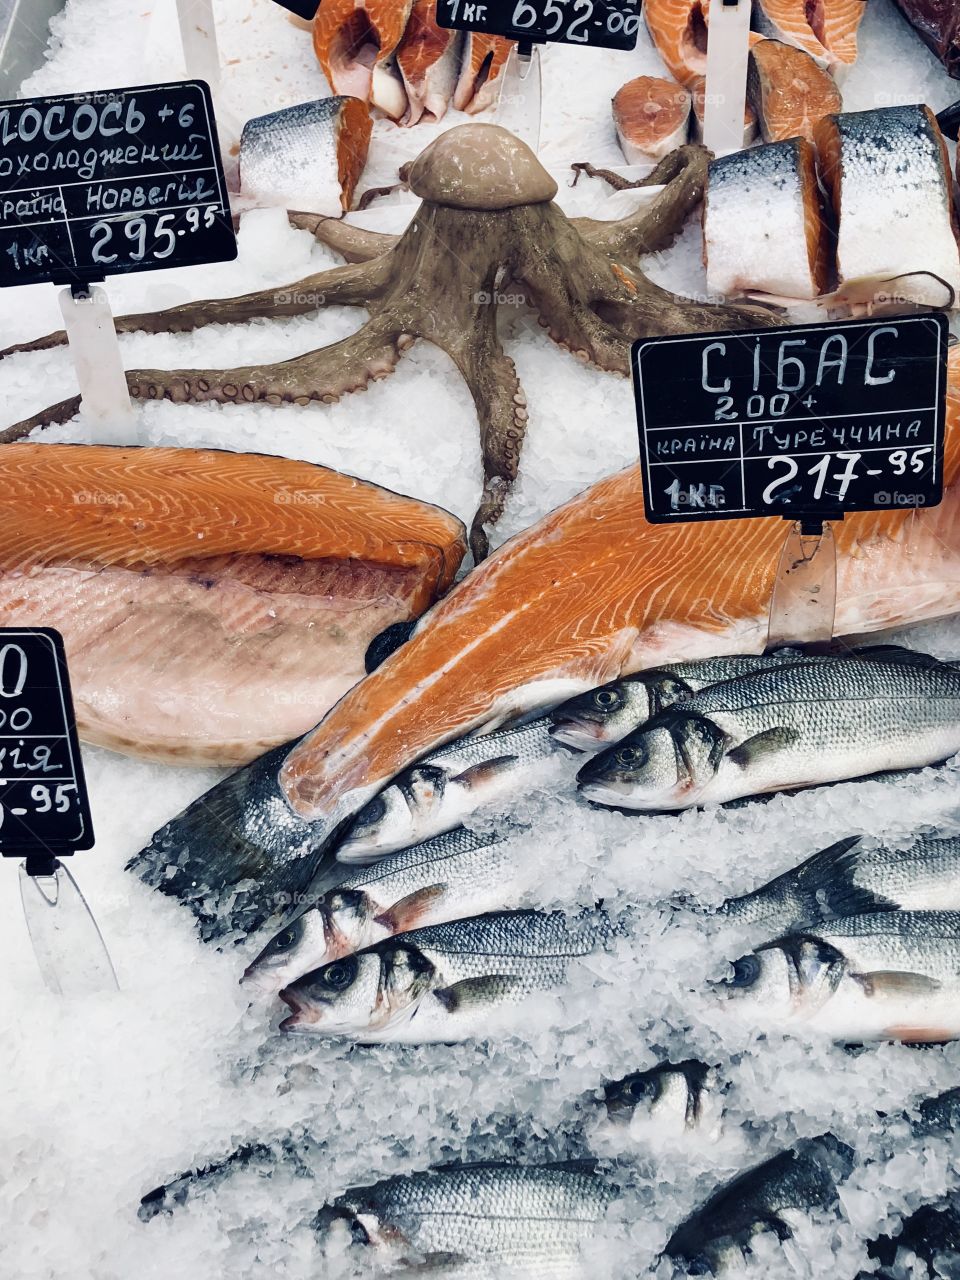 King size octopus and fish in the market